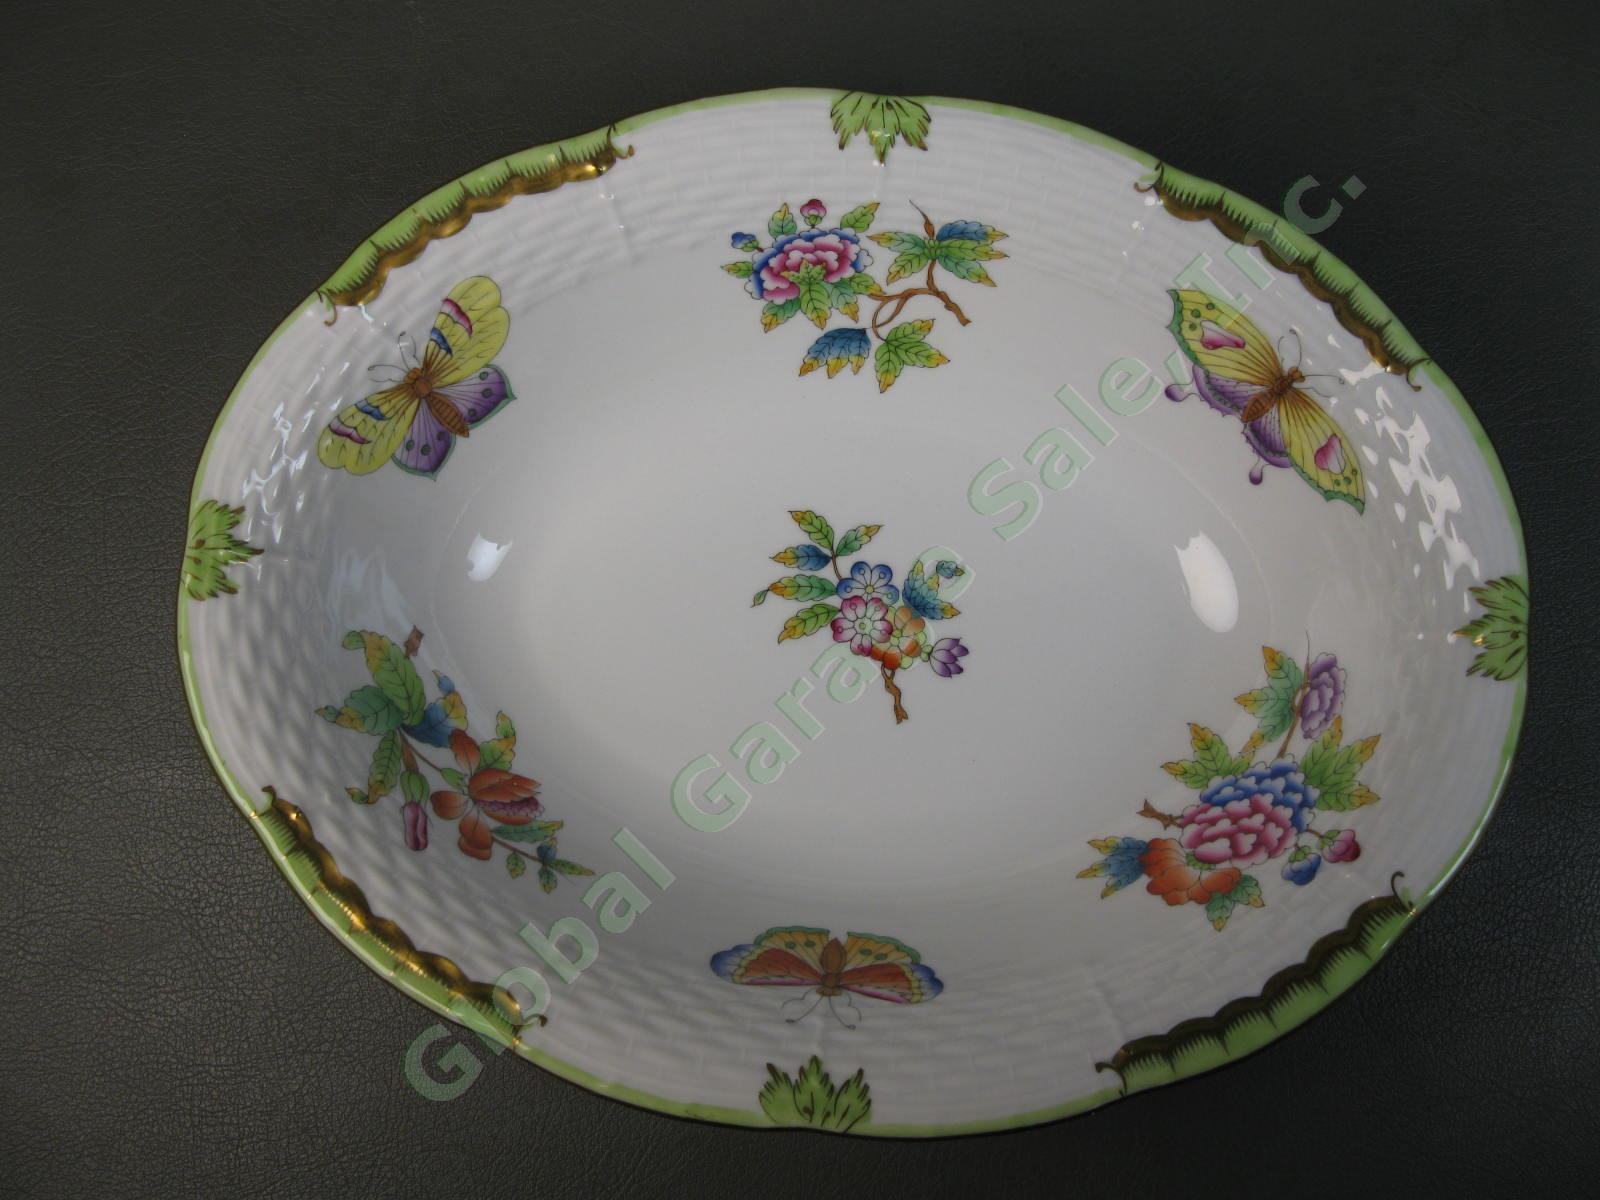 Herend Queen Victoria 10" Inch Oval Vegetable Serving Bowl 381/VBO Green Gold NR